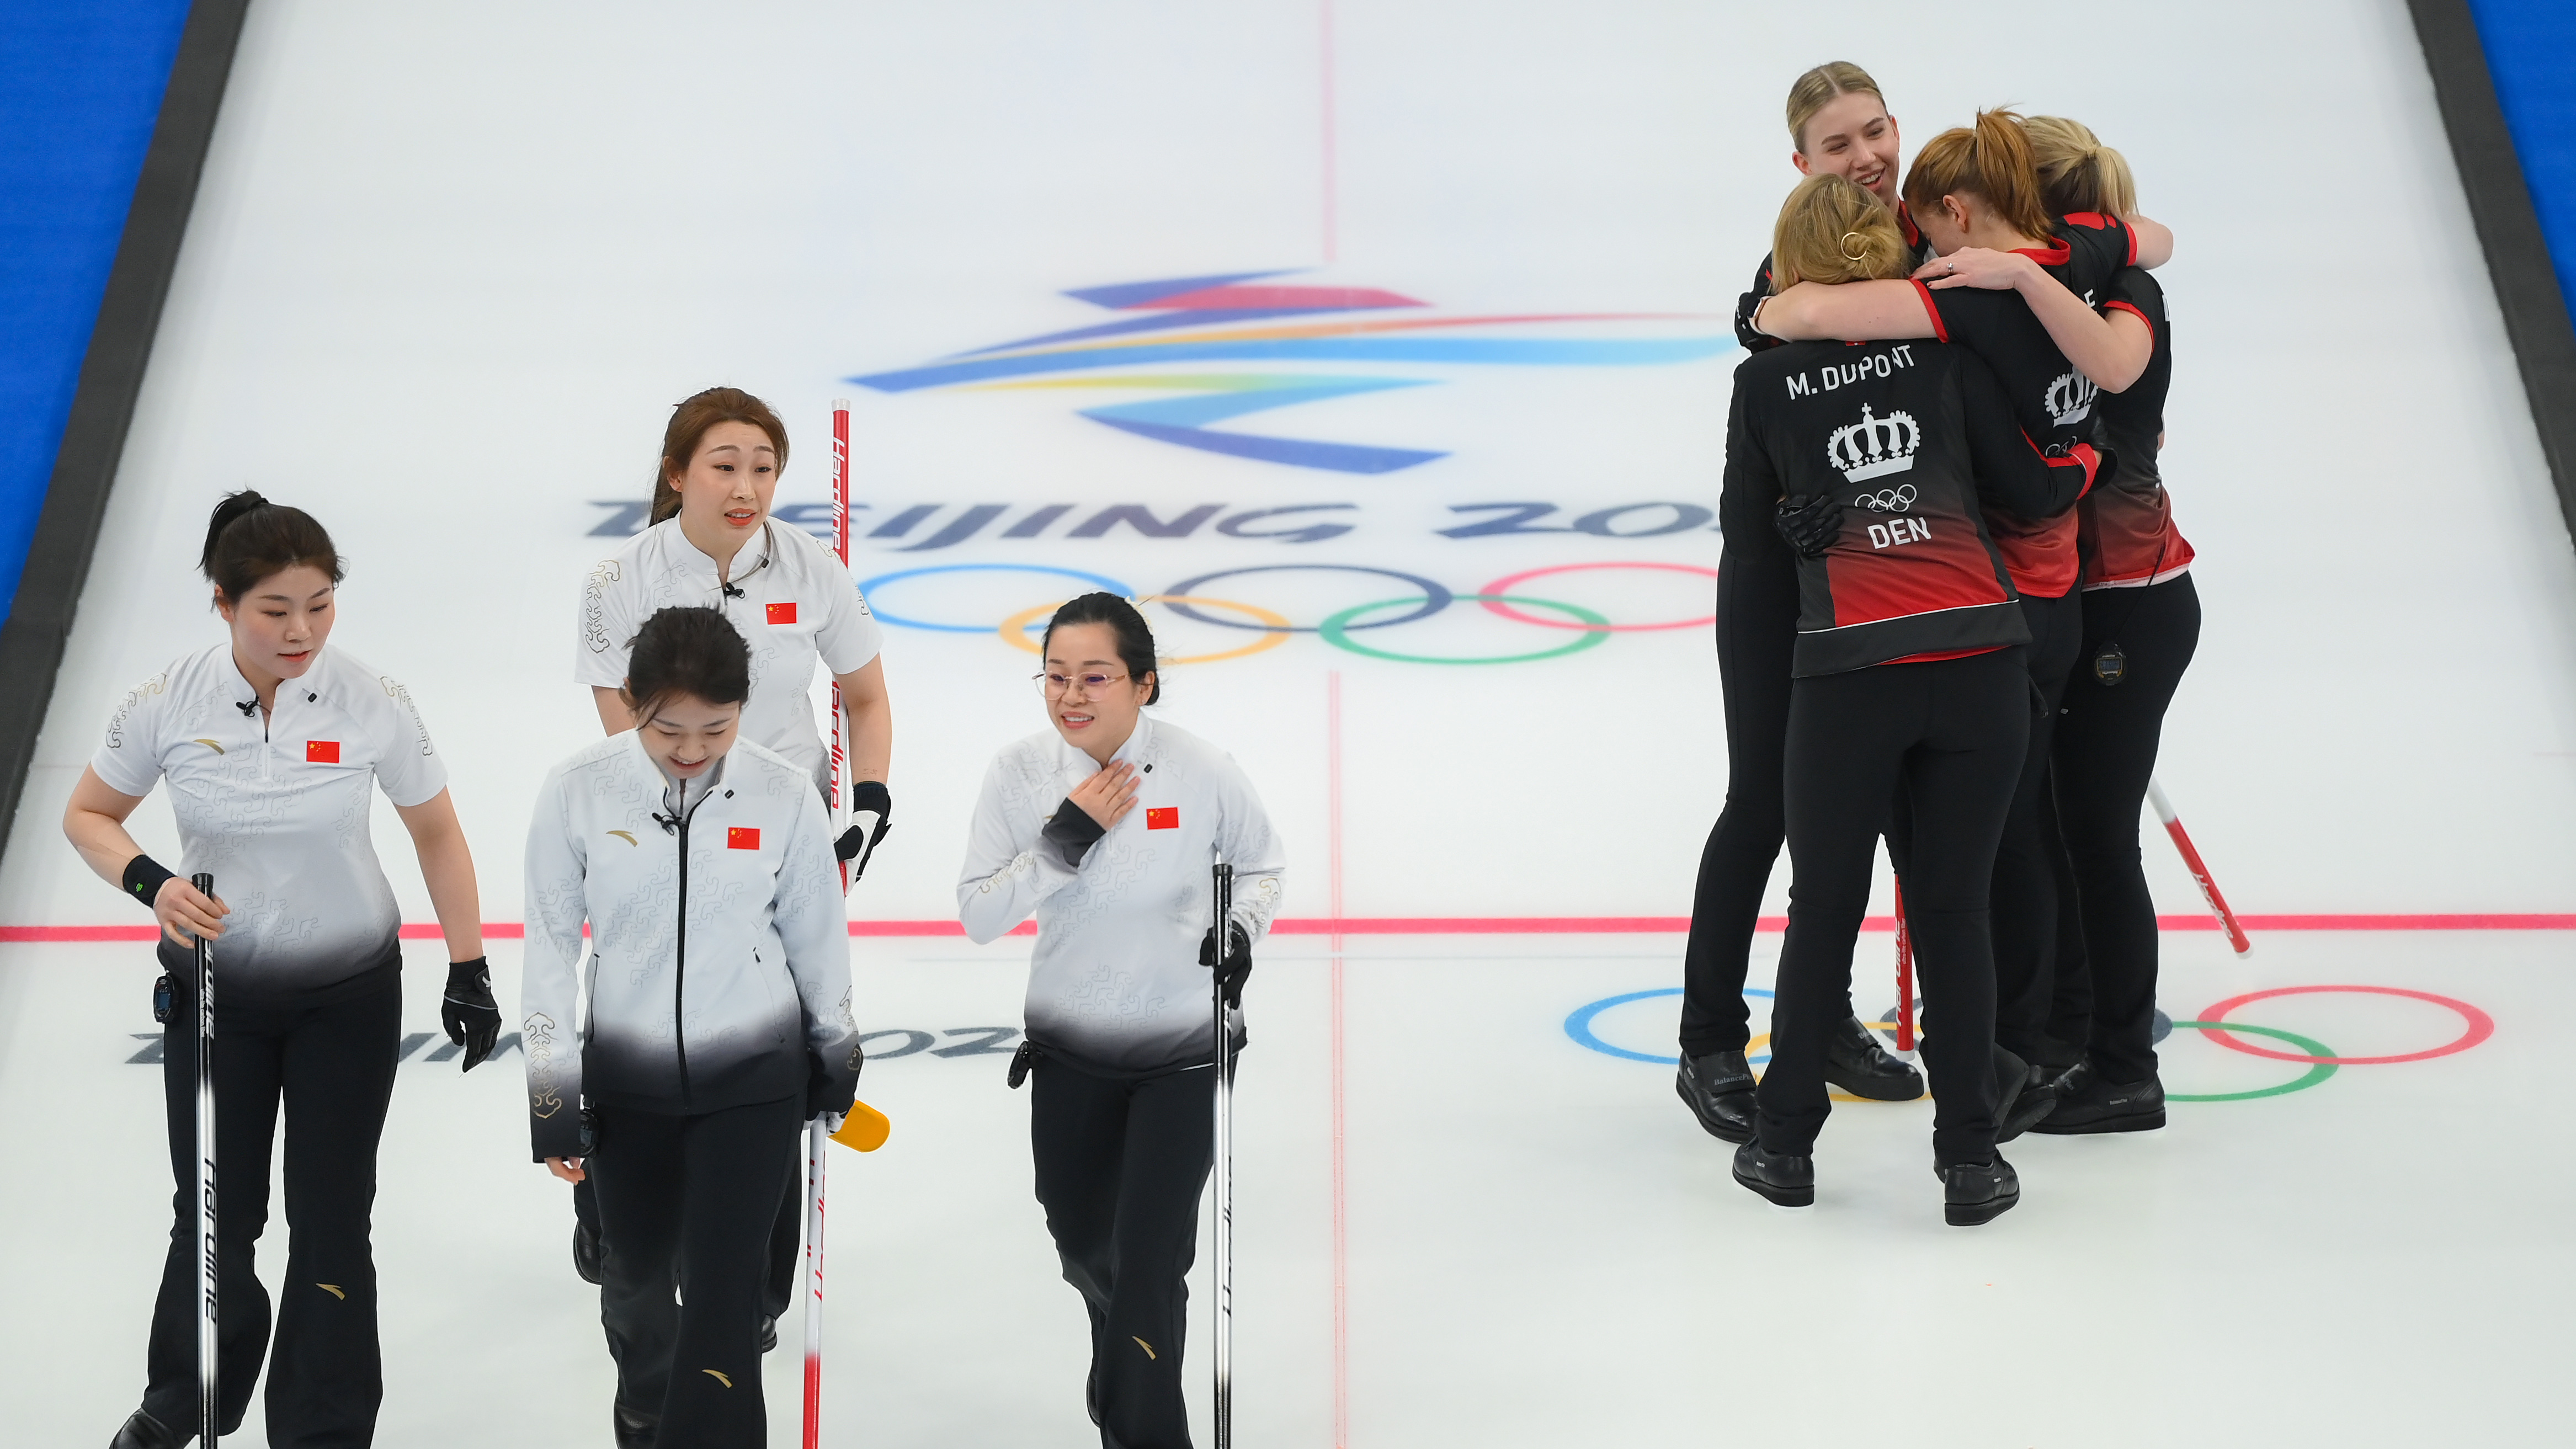 Denmark Wins on Last Stone to Defeat China in Womens Curling